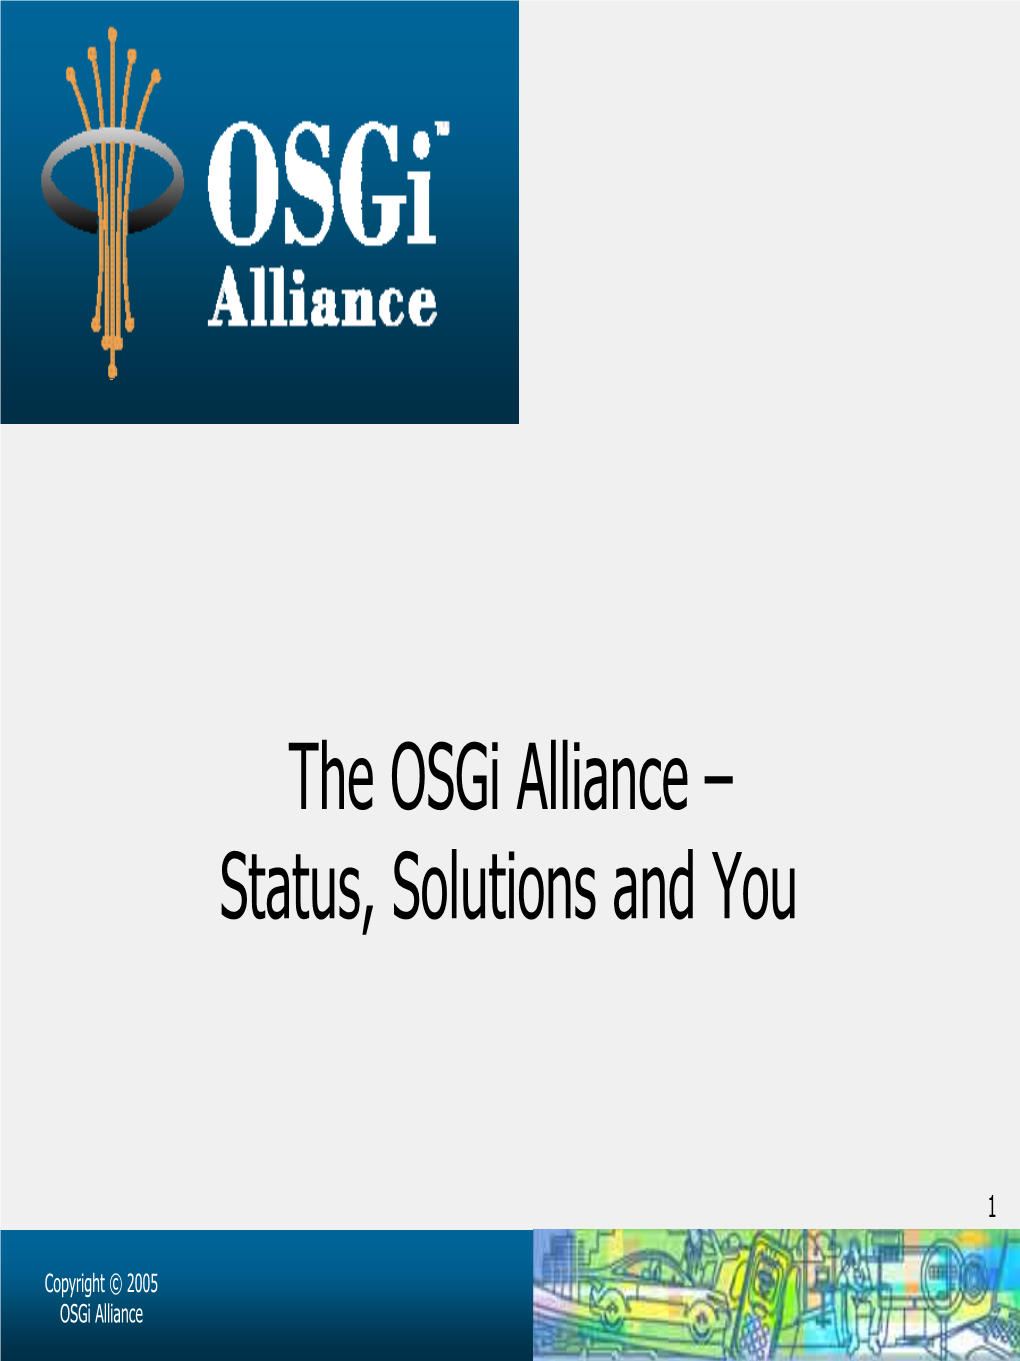 The Osgi Alliance – Status, Solutions and You